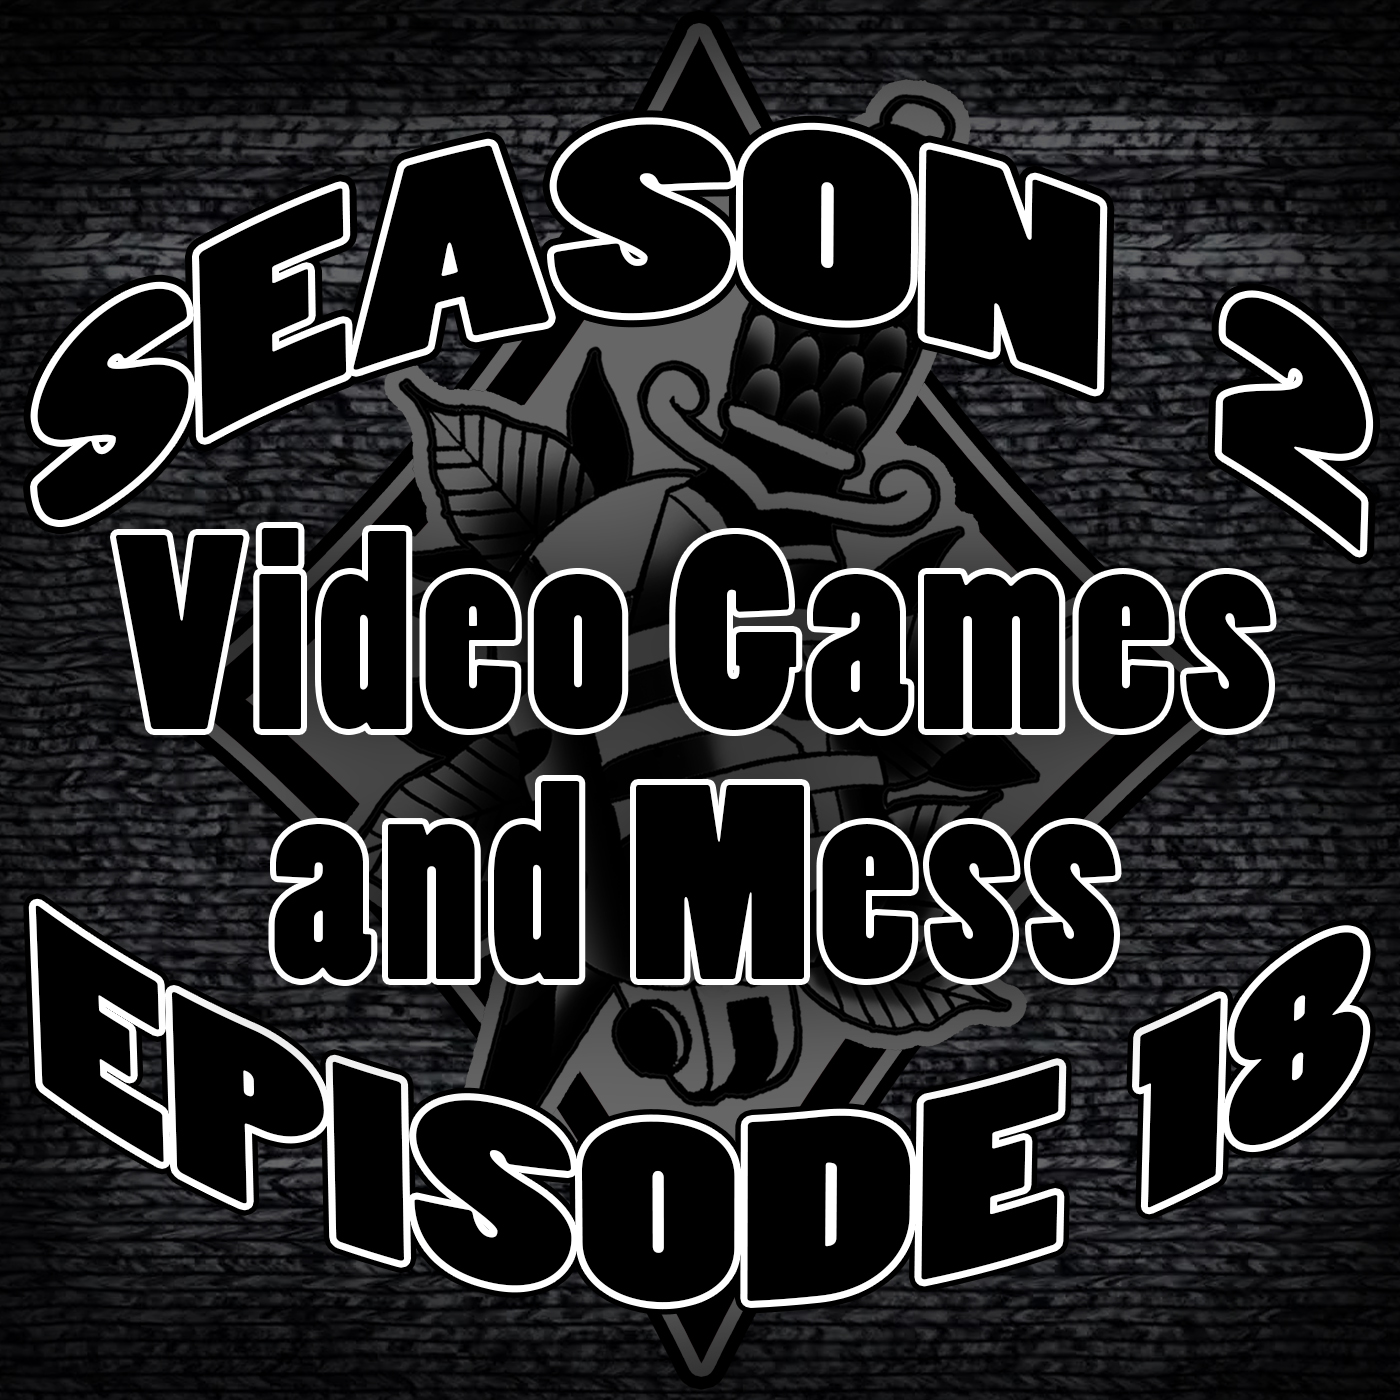 S2.E18 - Video Games and Mess